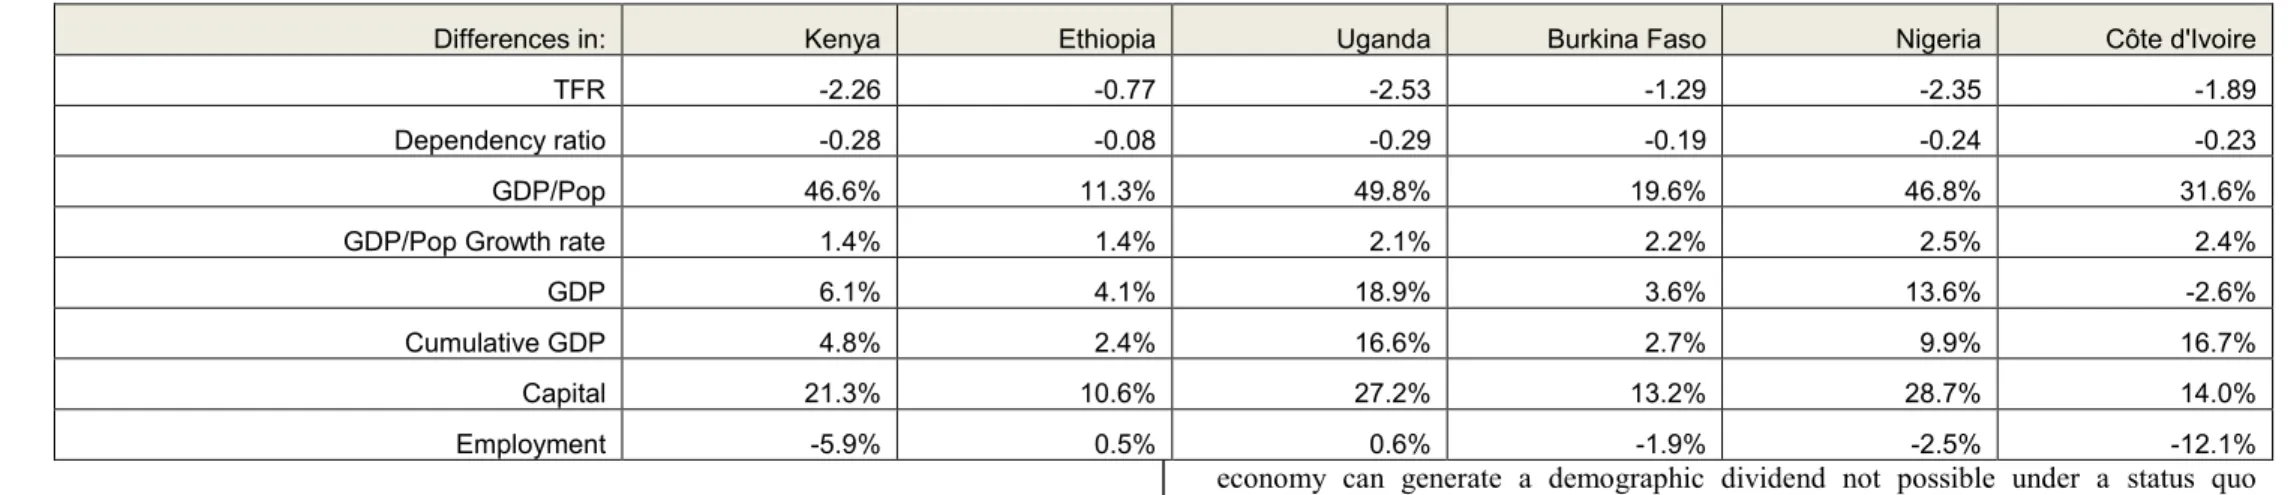 Table 4: End Year Differences in Indicators between Two Scenarios in Six African Countries Using the DemDiv Model 